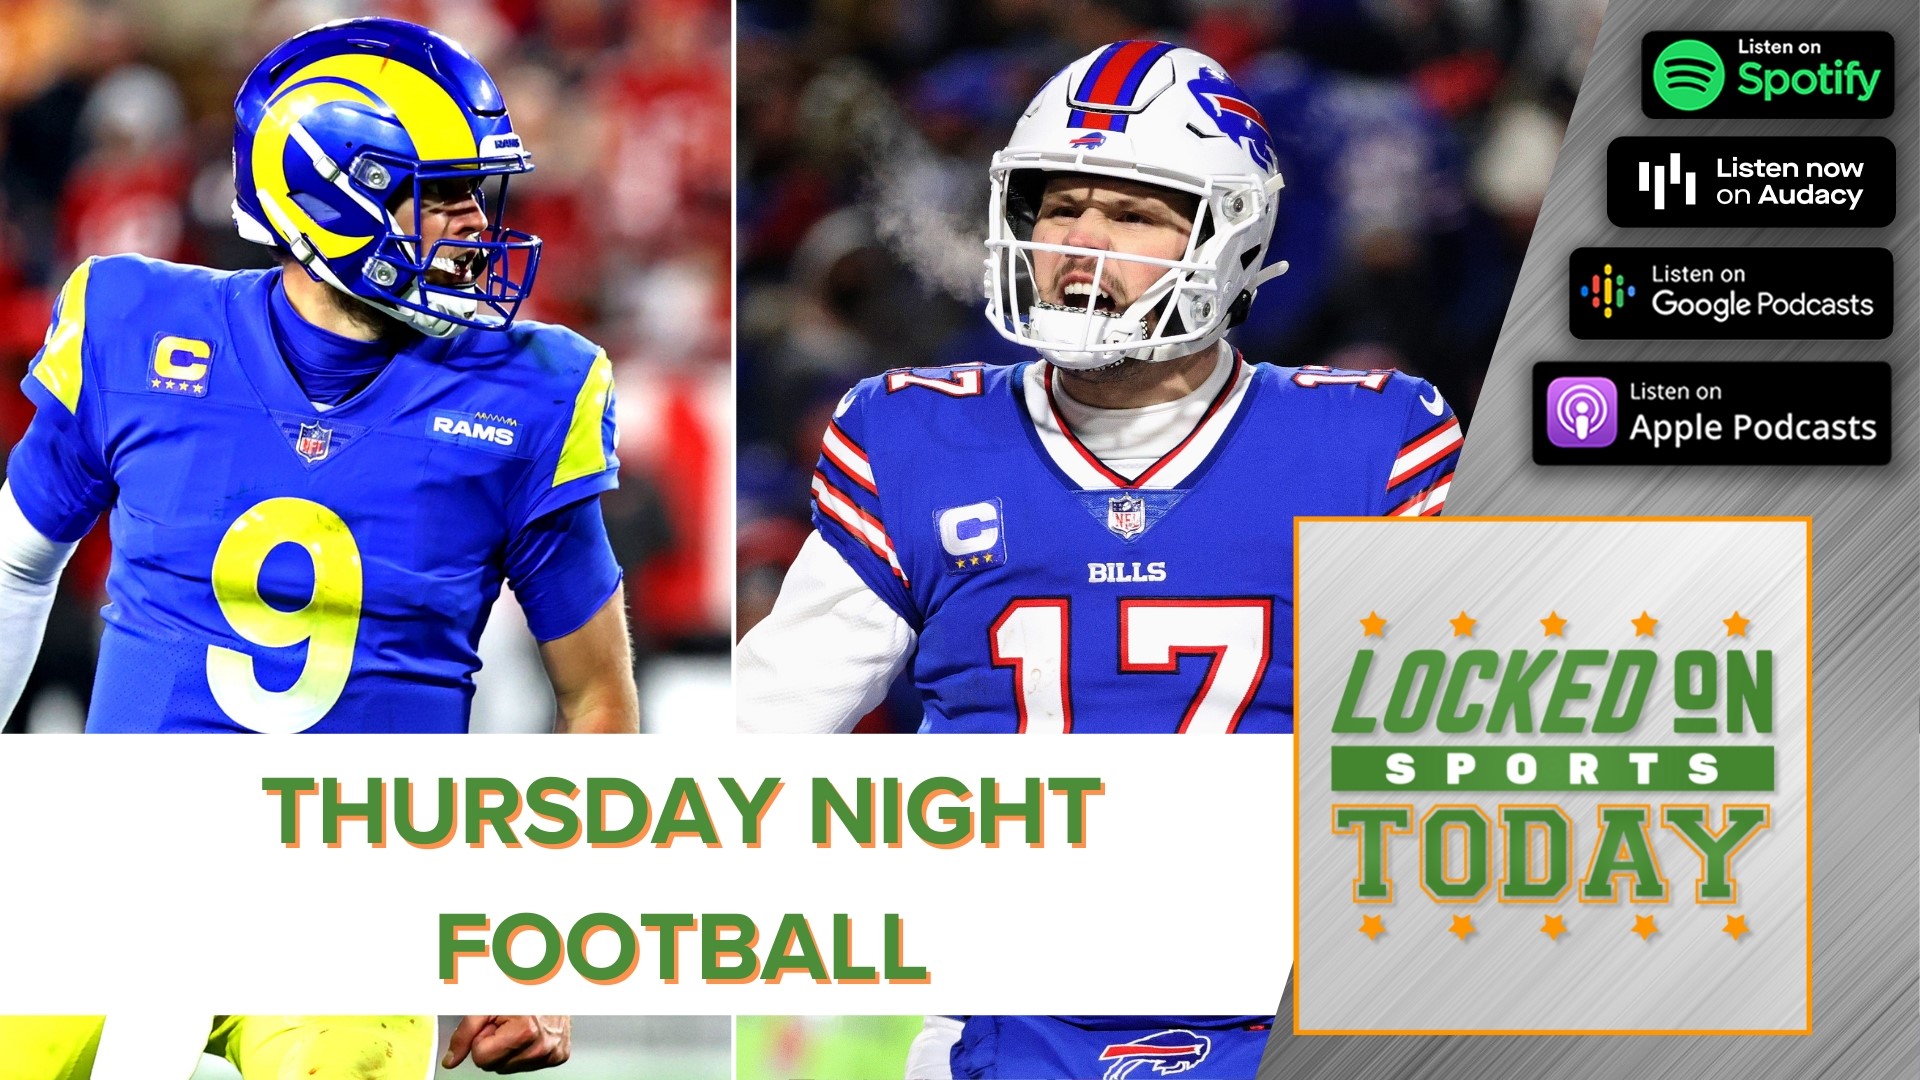 google who plays thursday night football this week